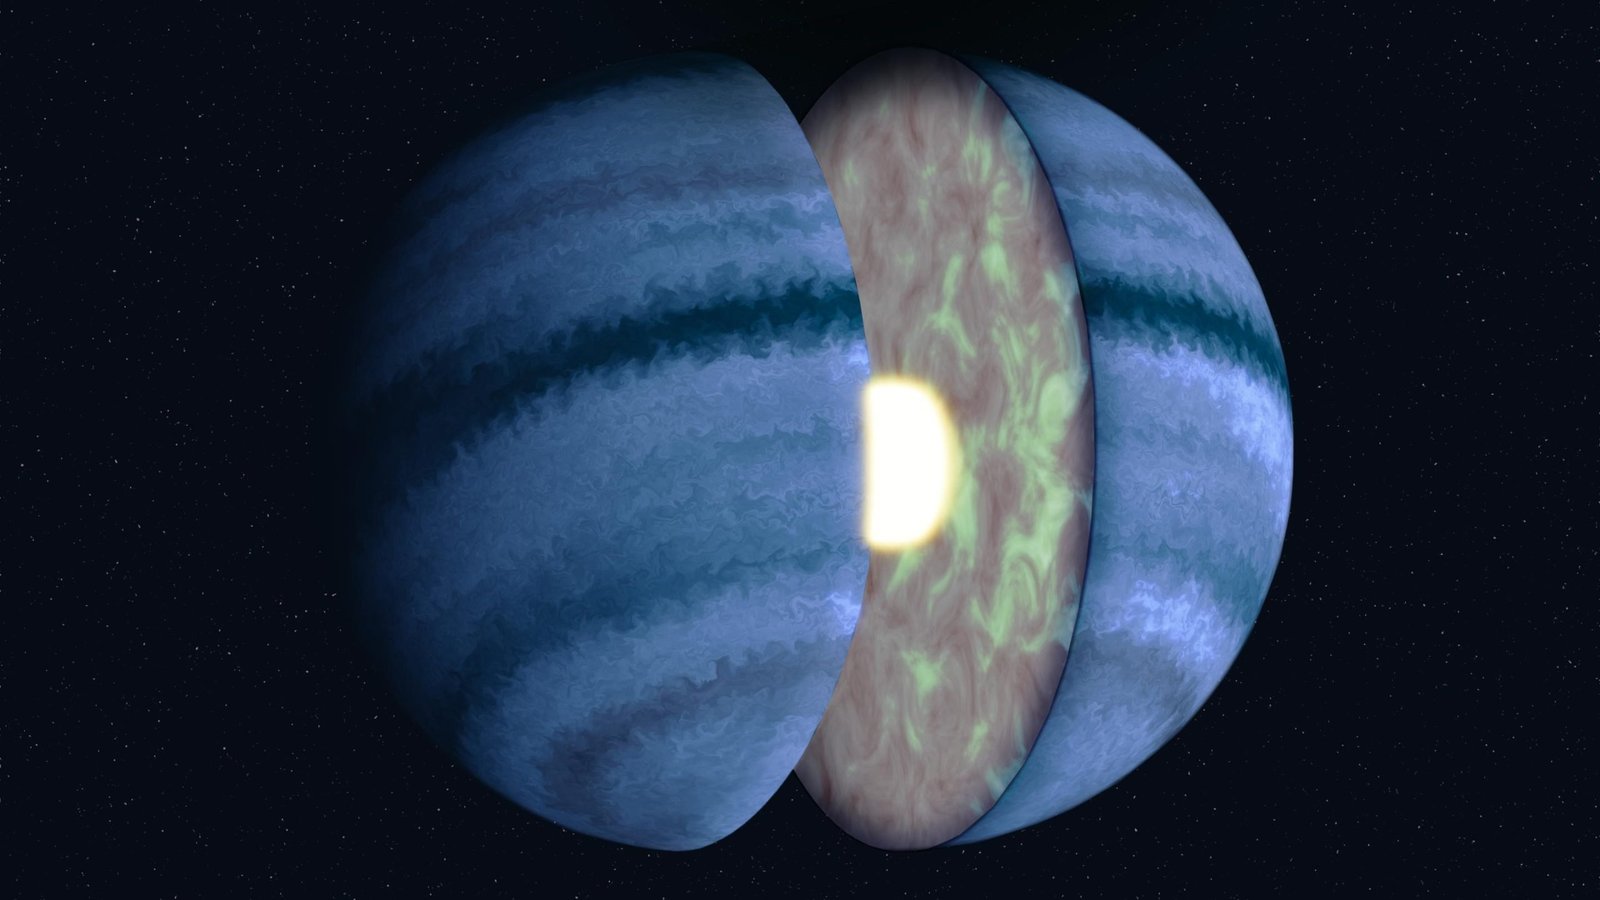 Webb Does the “Impossible” – Space Telescope Captures First Glimpse of an Exoplanet’s Interior